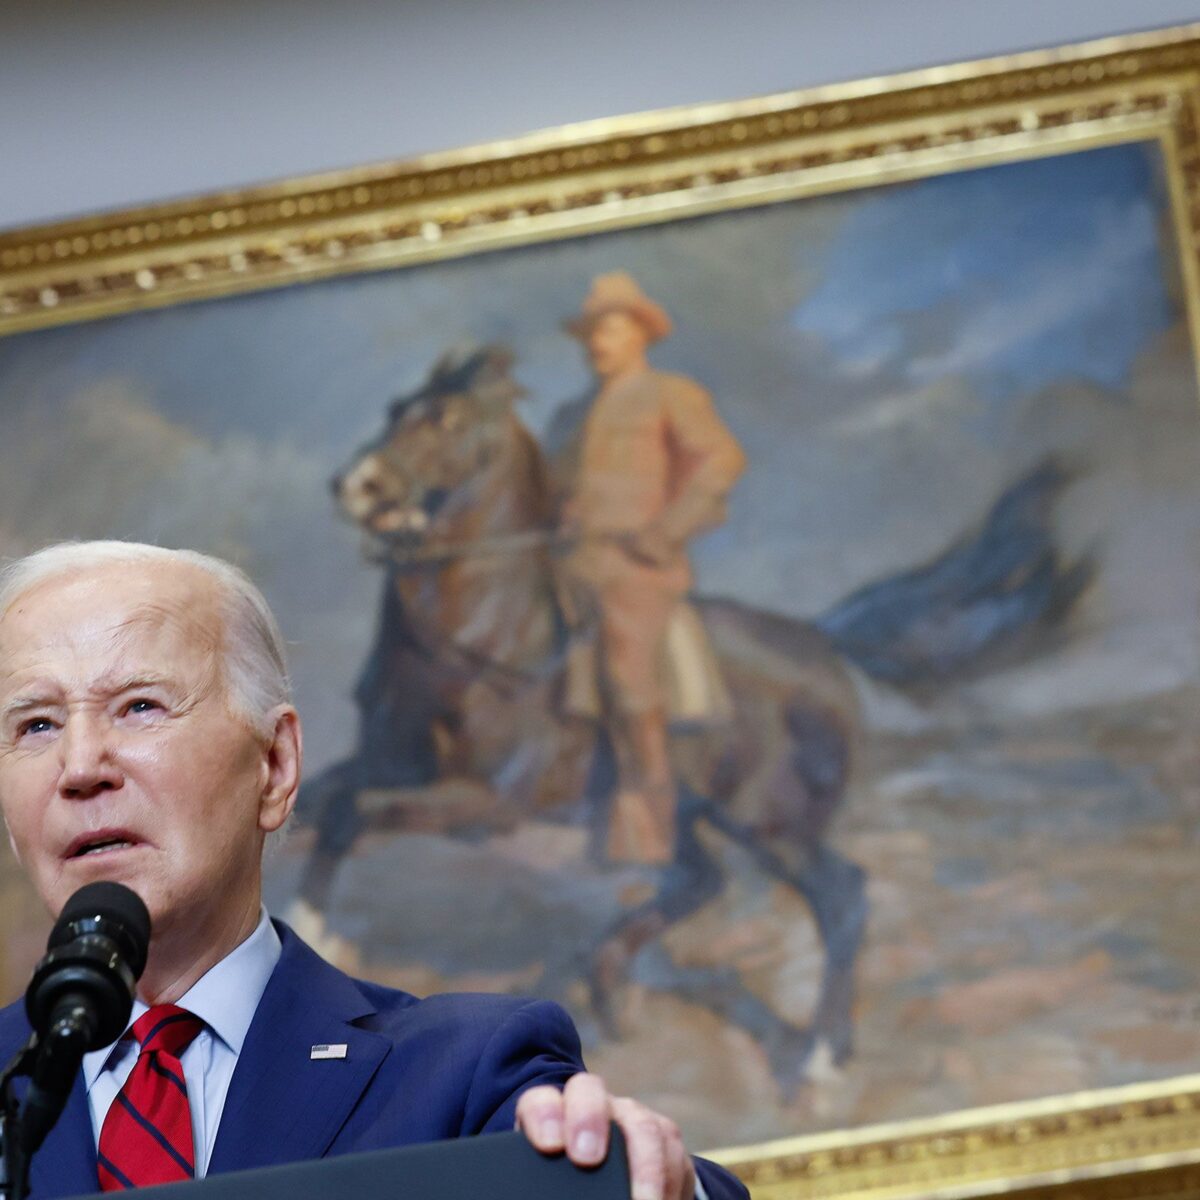 President Biden’s Balancing Act Amidst Nationwide Protests